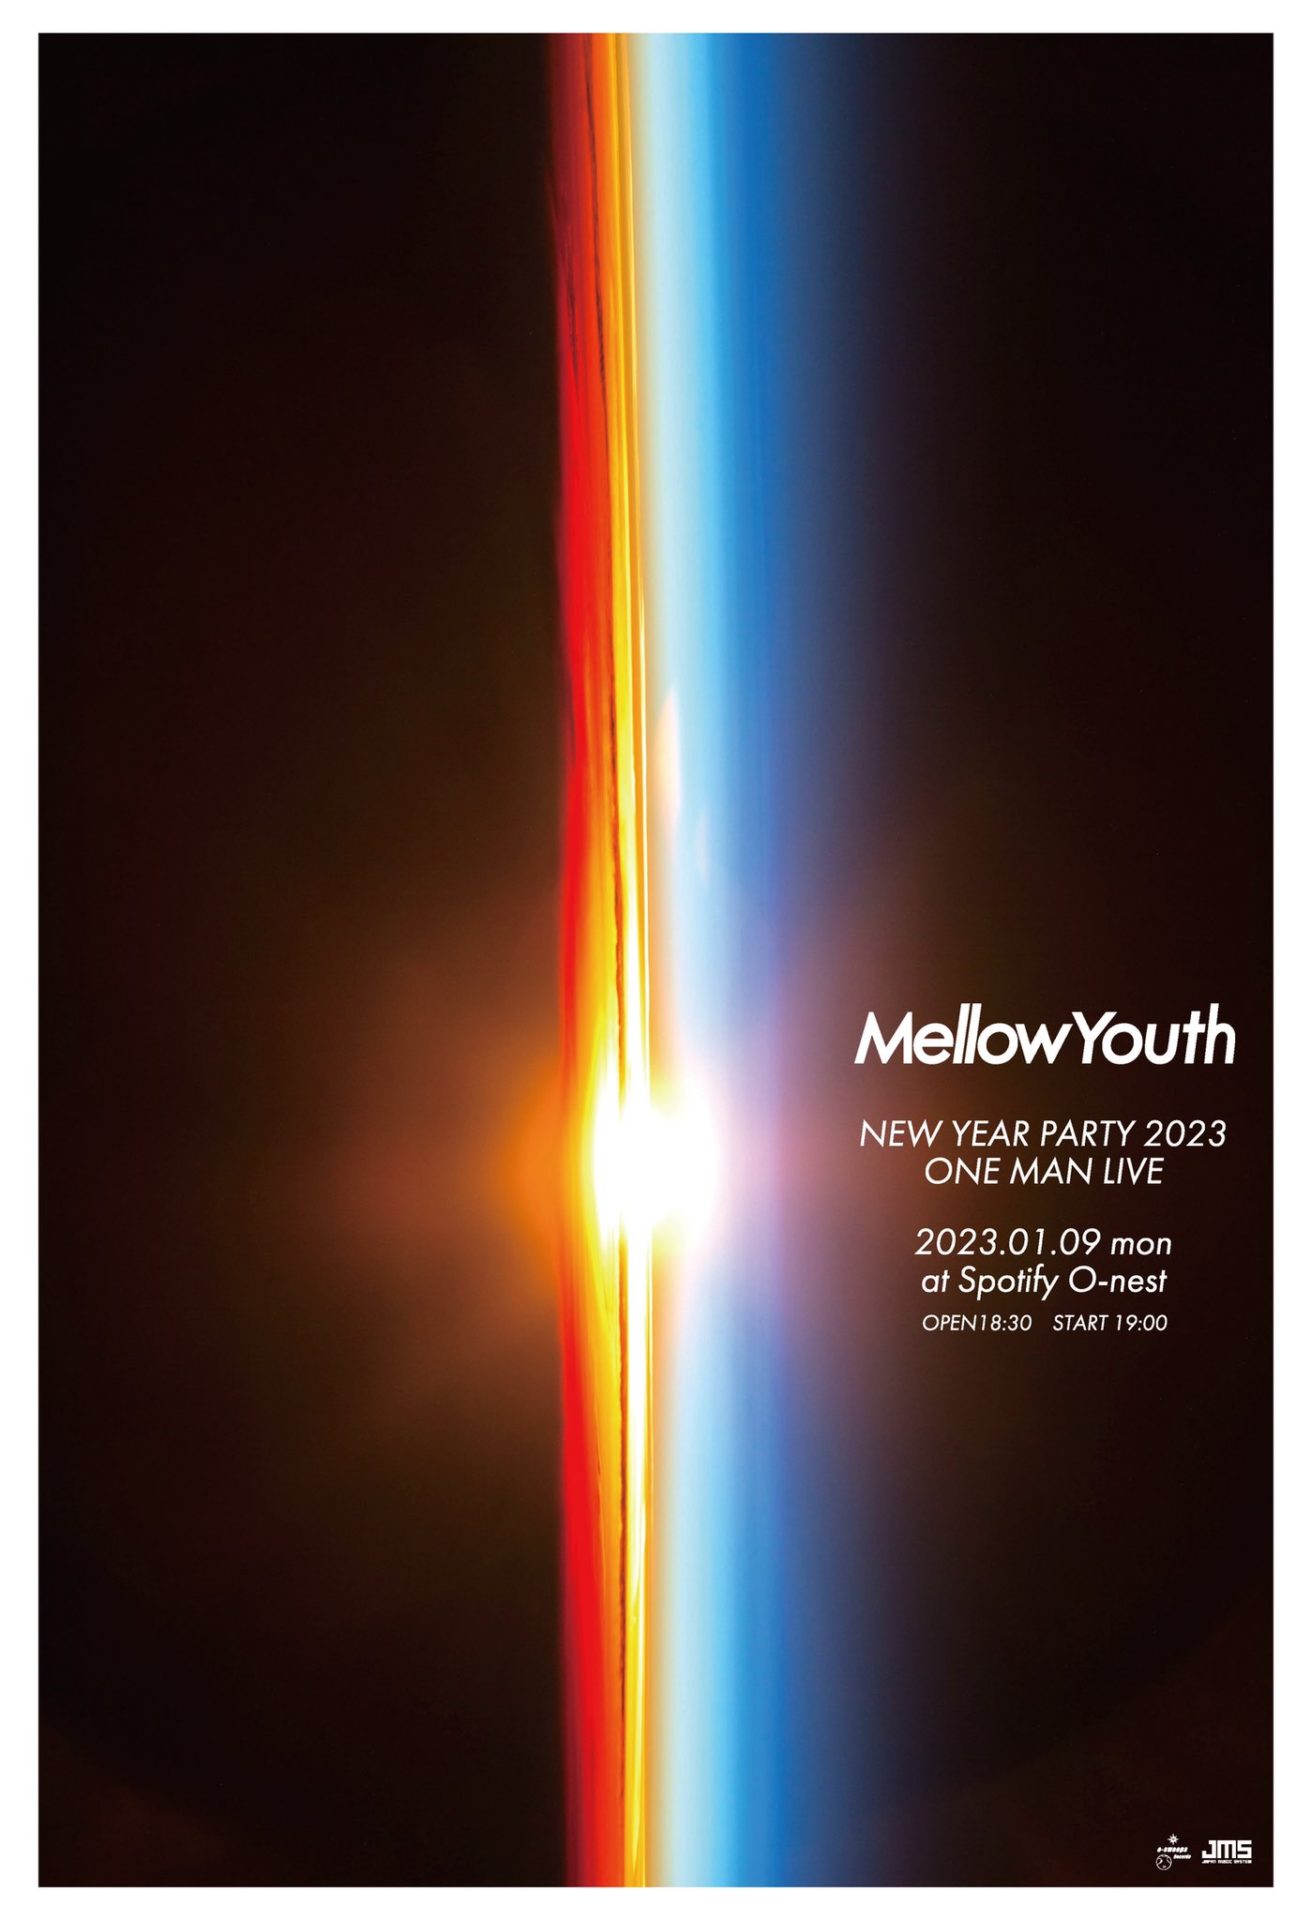 Mellow Youth 「NEW YEAR PARTY 2023」  ONEMAN LIVE